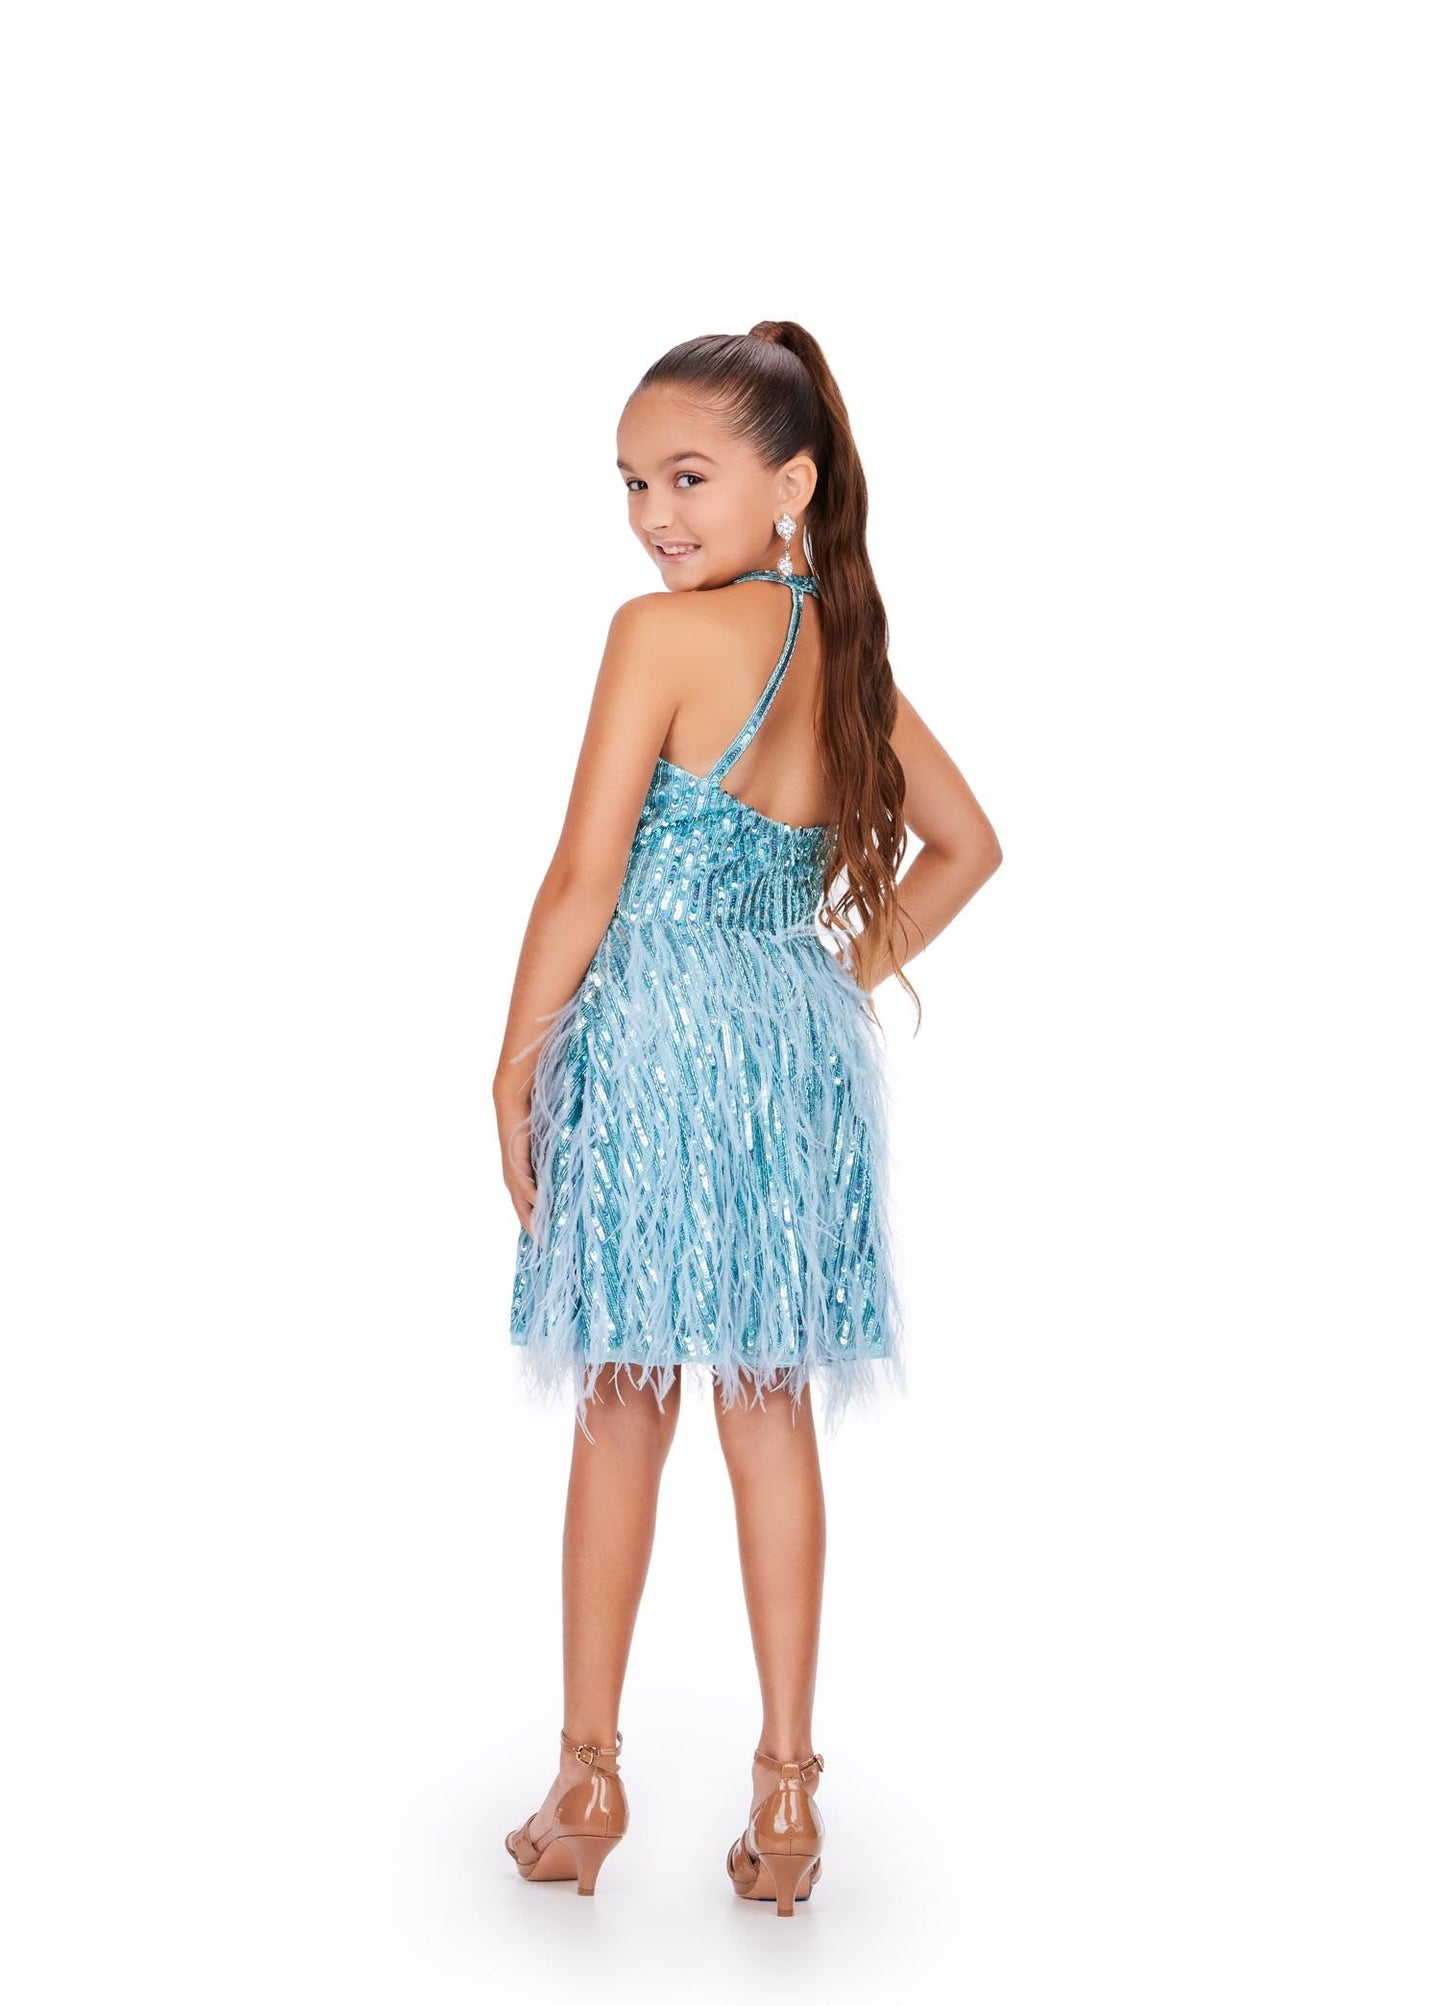 Ashley Lauren Kids 8196 Size 10 Orchid Fully Beaded Girls Cocktail Dress Halter Top With Feather A-Line Skirt